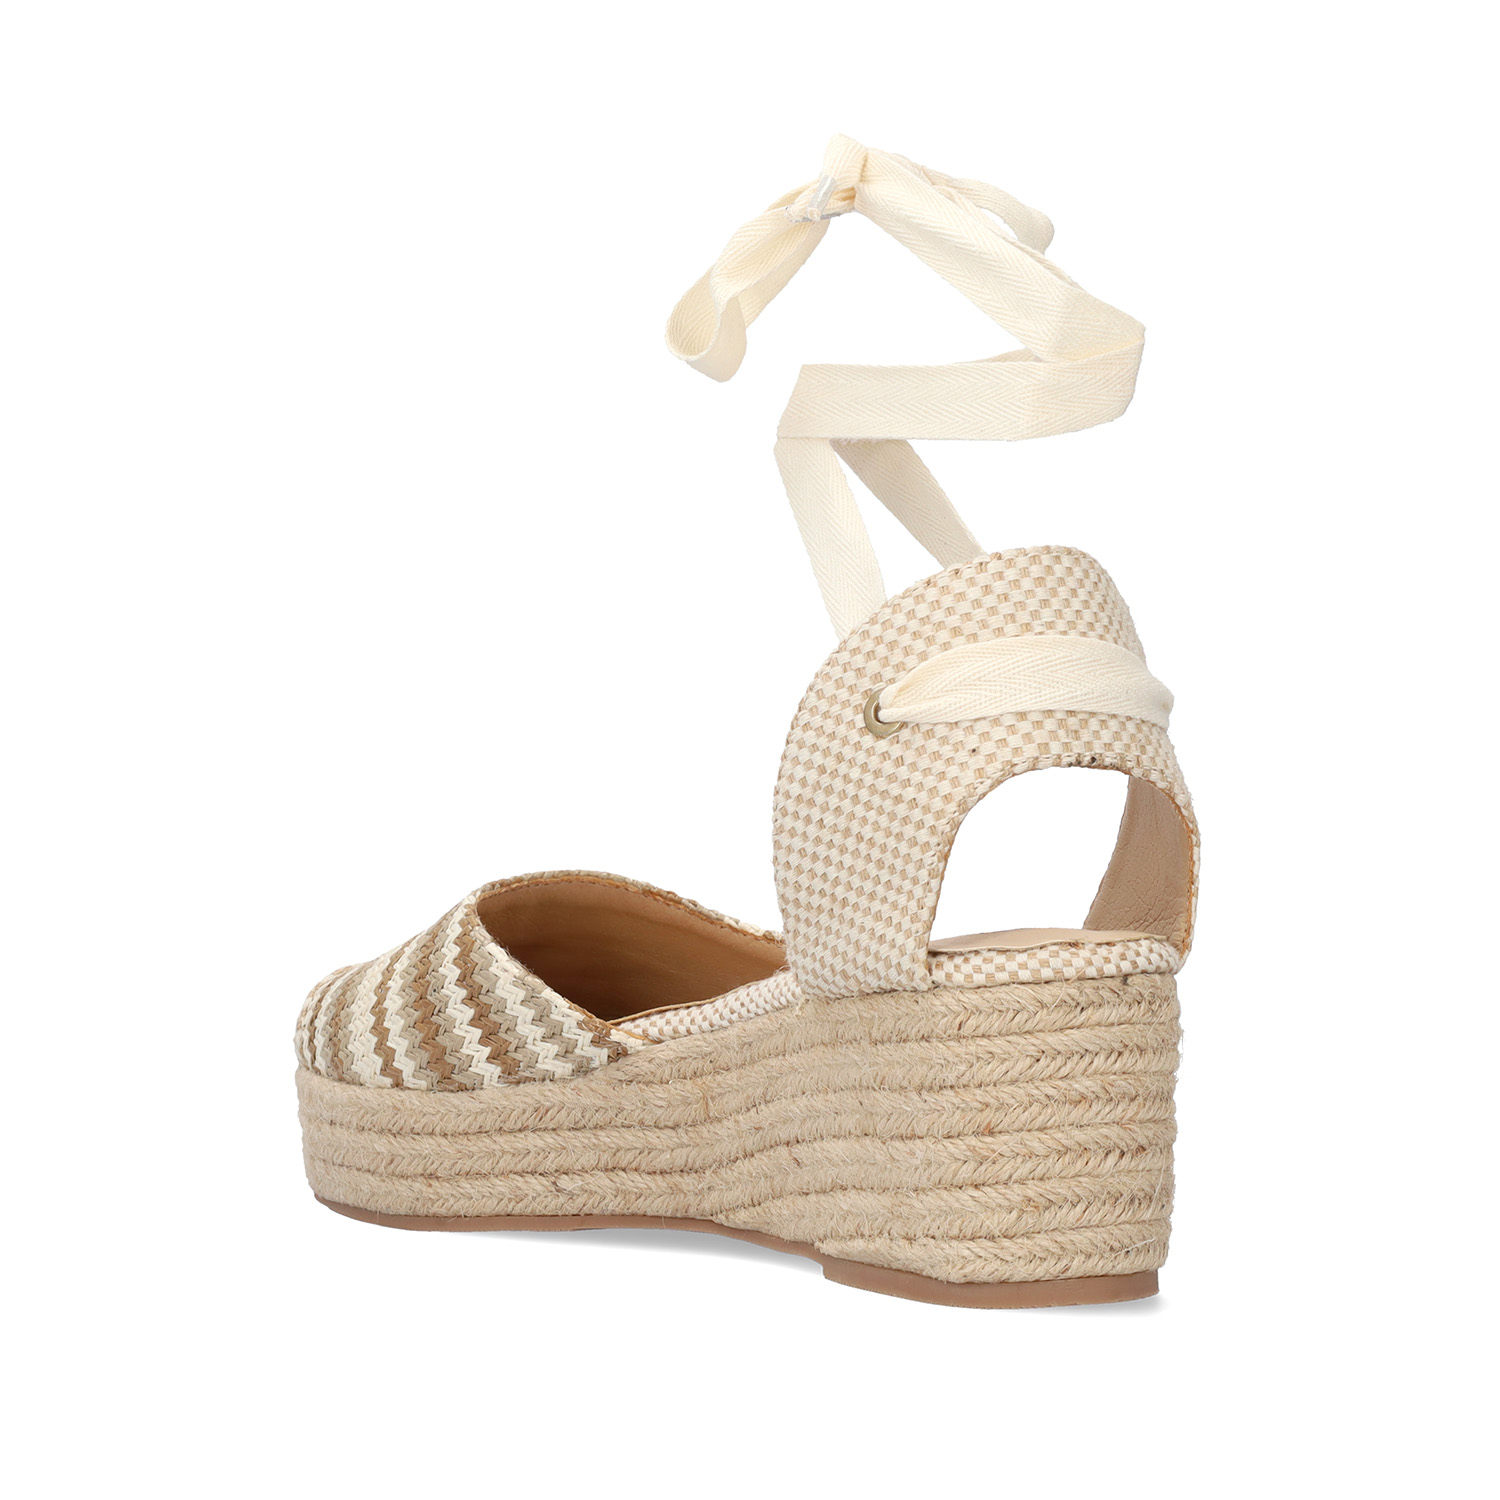 Beige fabric sandals with a jute wedge 